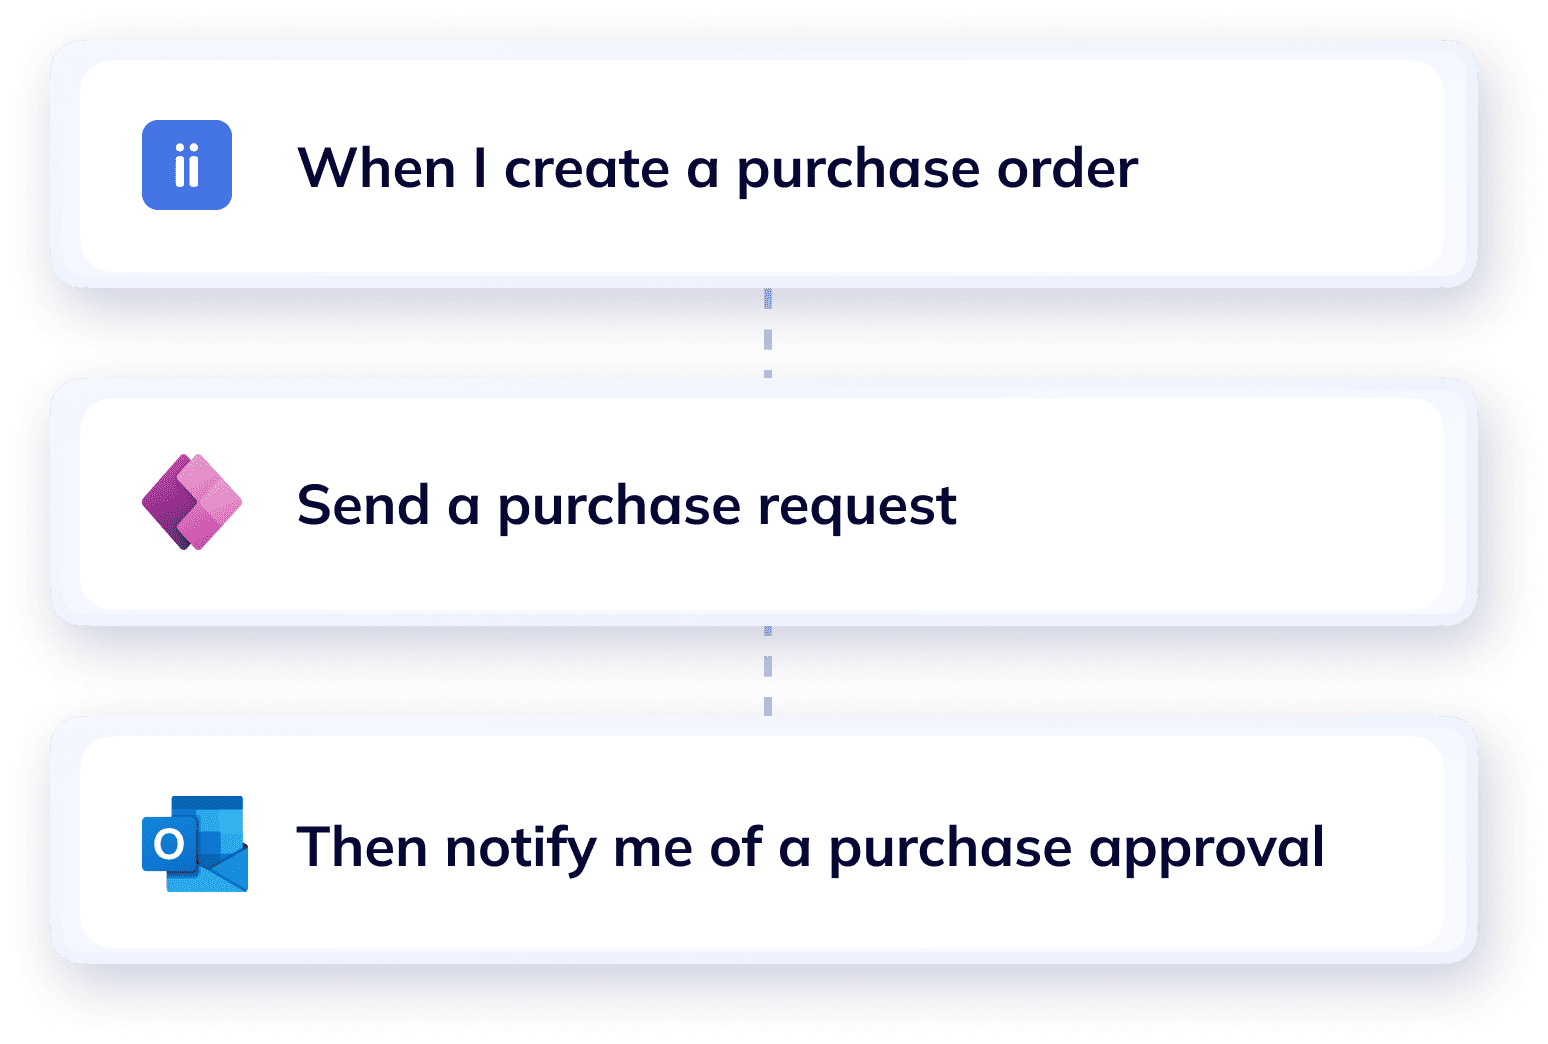 Workflow of a purchase order approval in Wiise